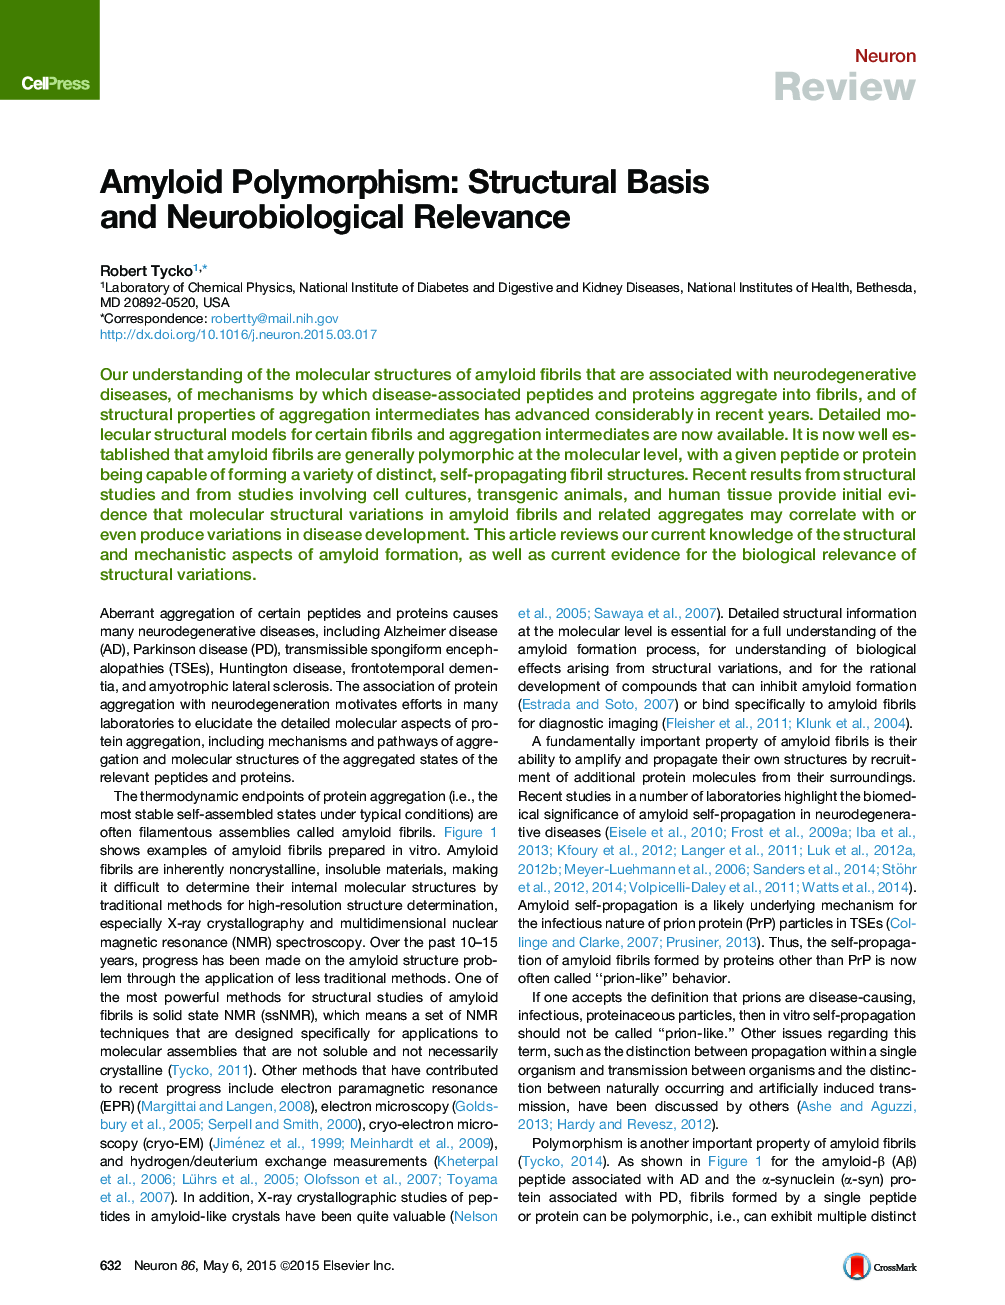 Amyloid Polymorphism: Structural Basis and Neurobiological Relevance